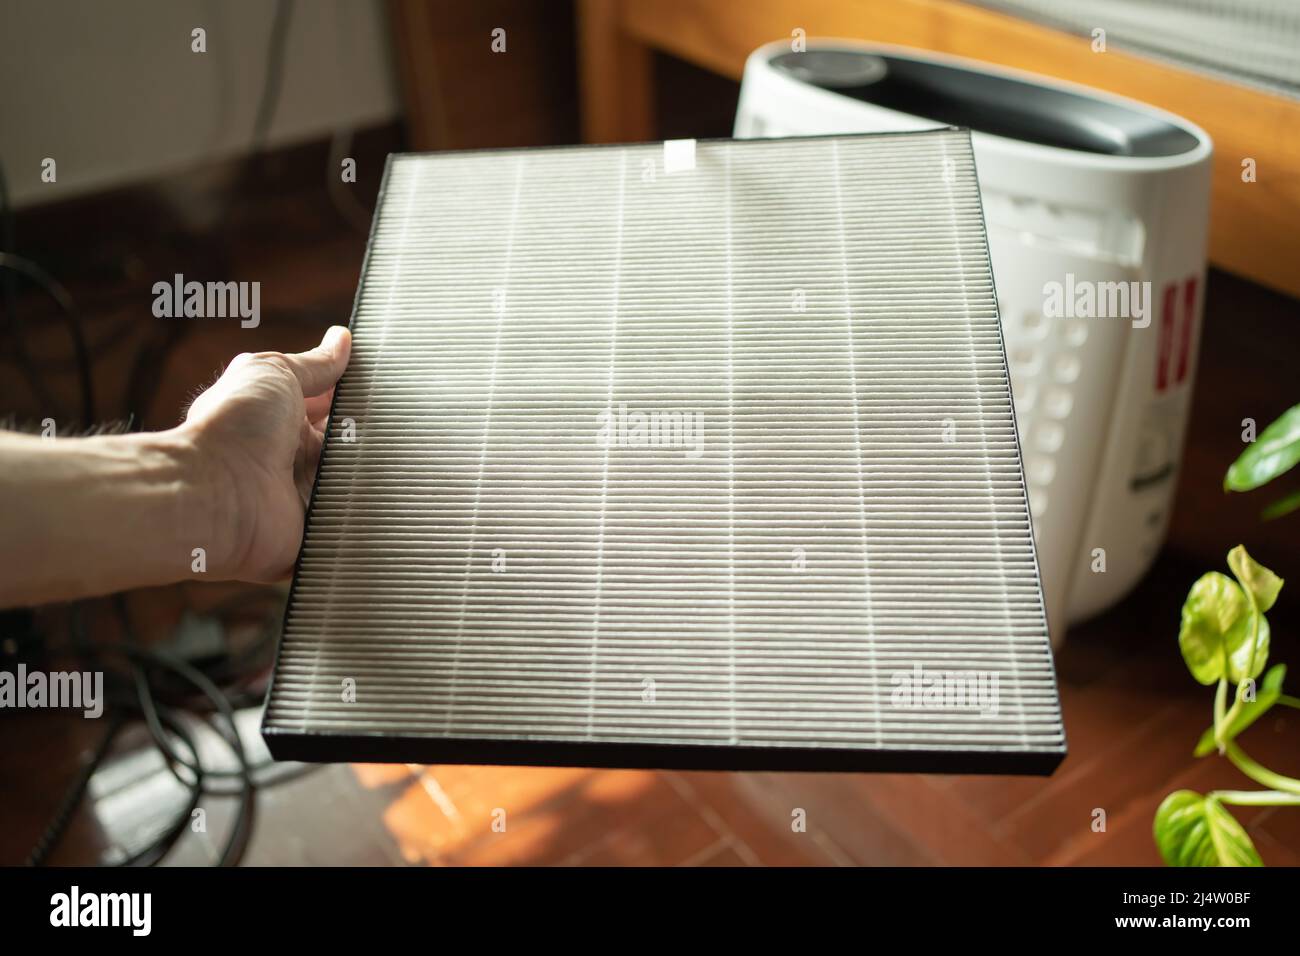 Air purifier filter in hand Stock Photo